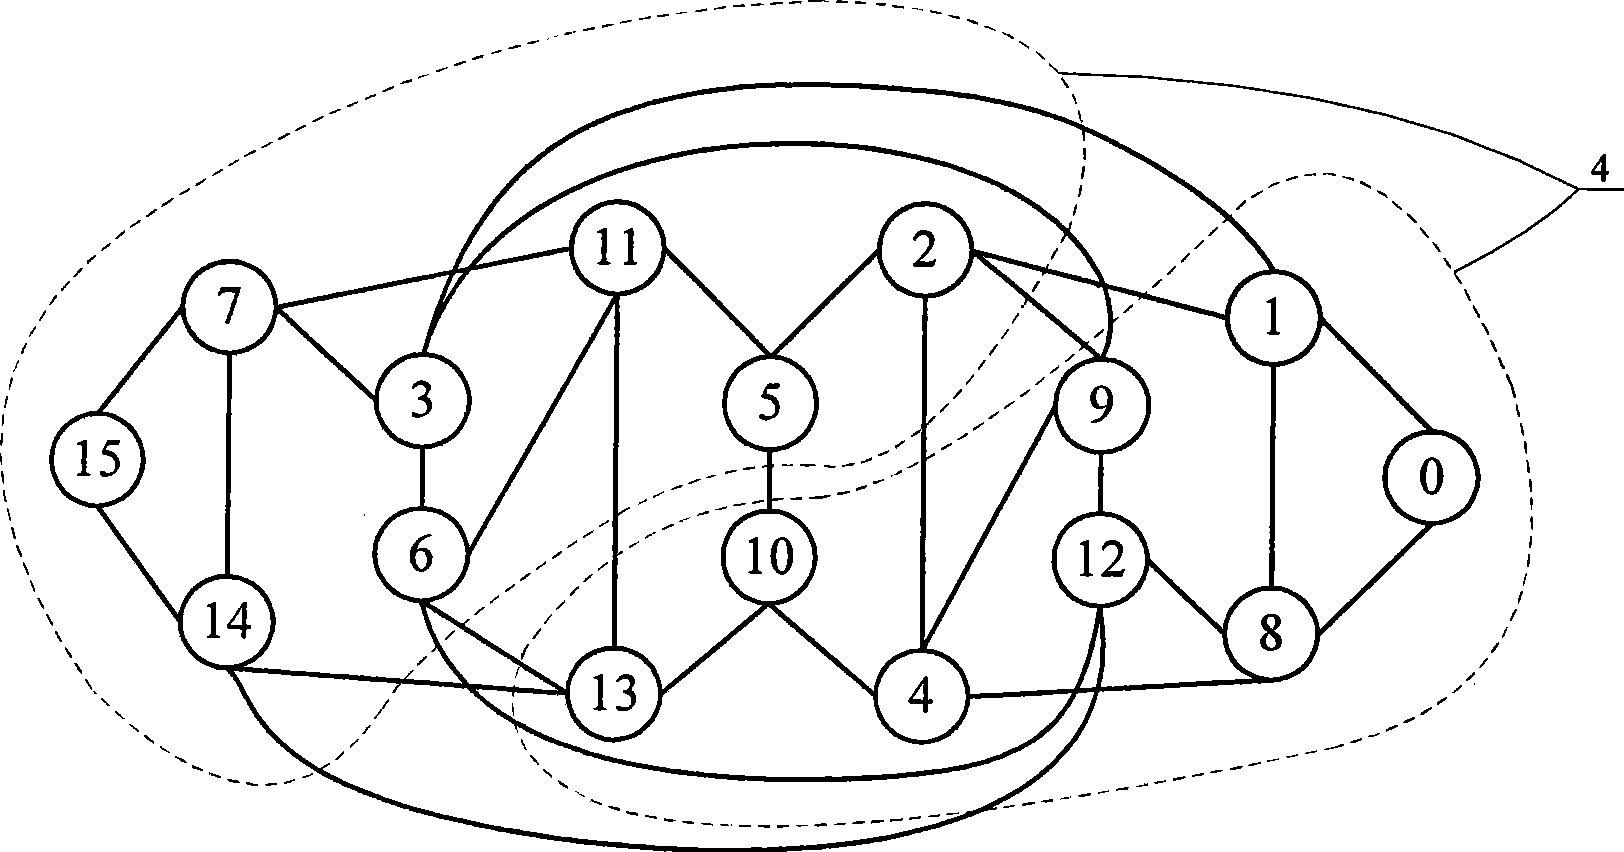 Method for constructing network on three-dimensional chip